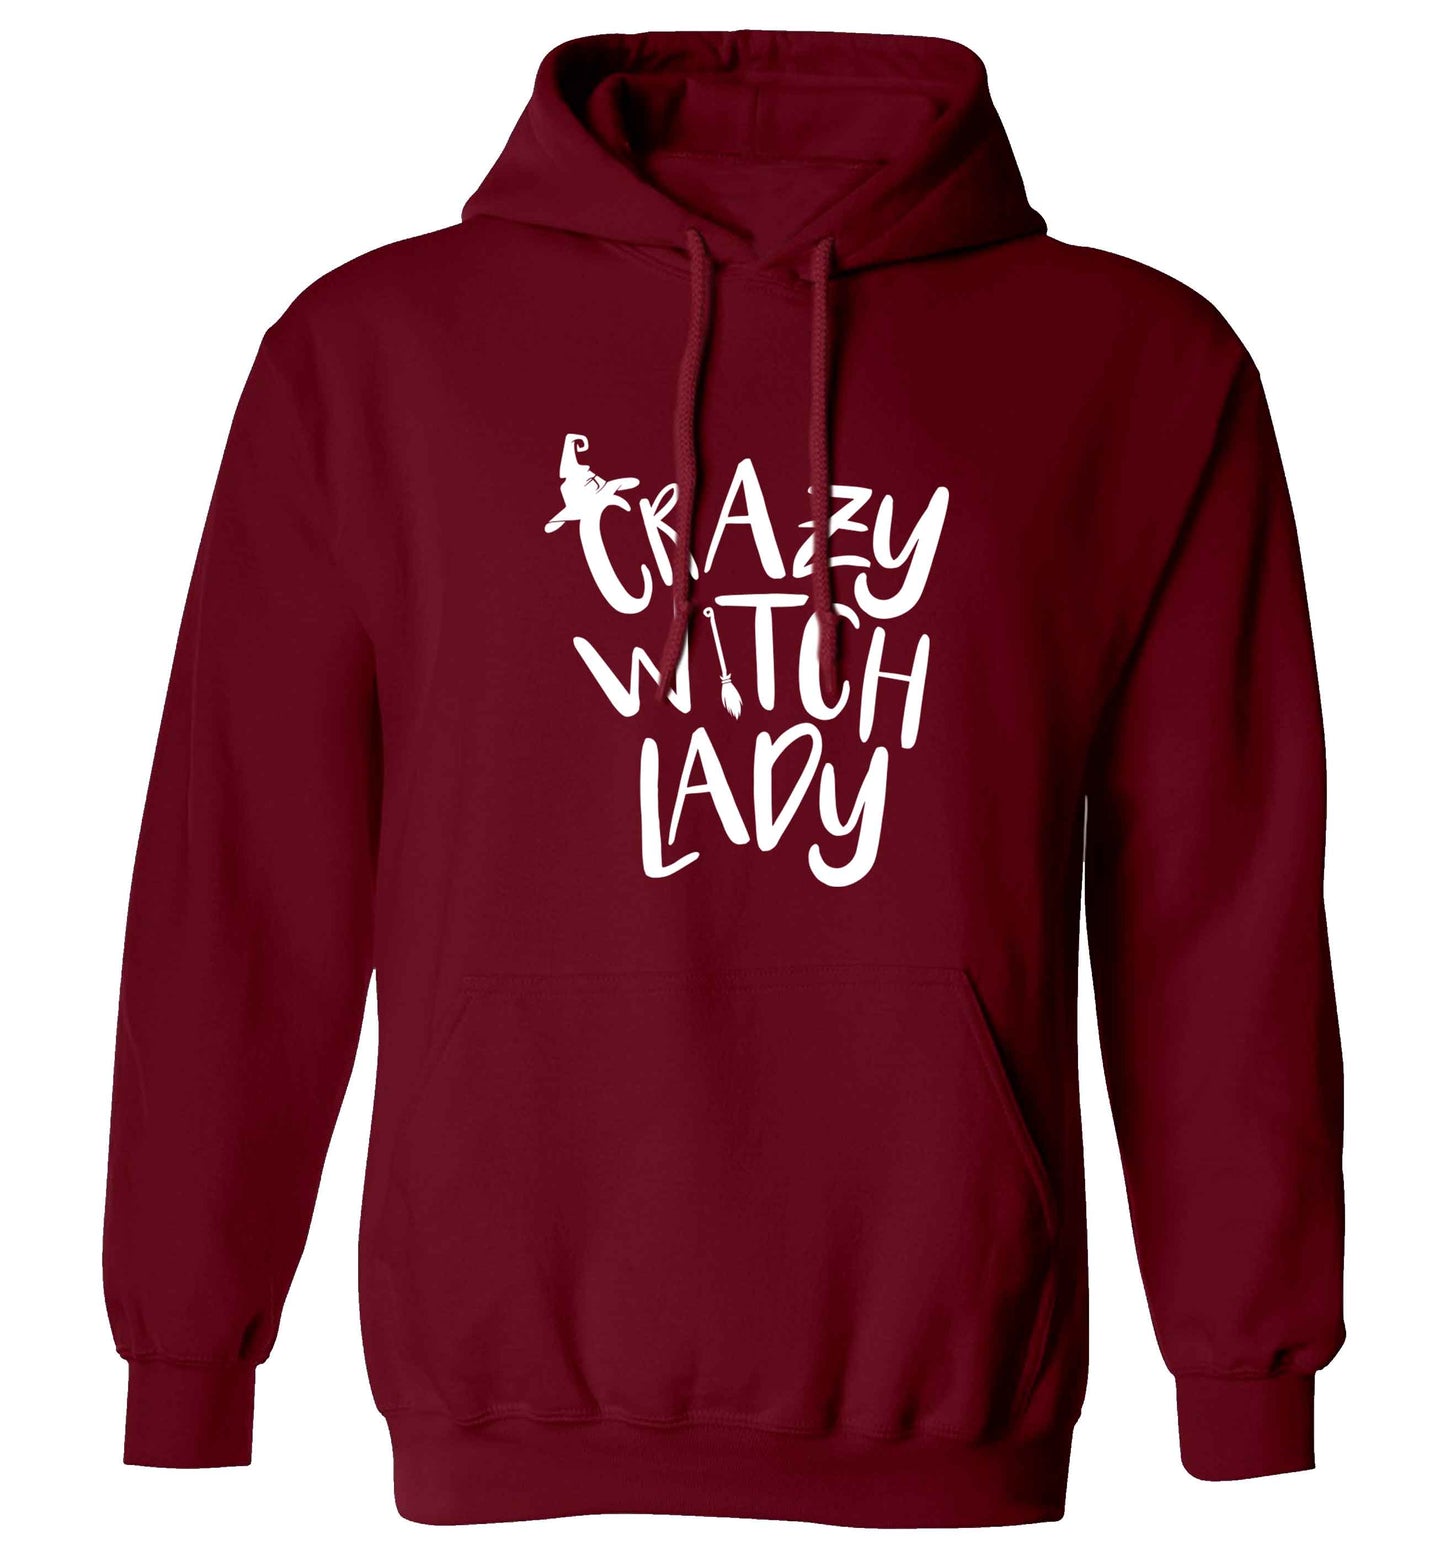 Crazy witch lady adults unisex maroon hoodie 2XL